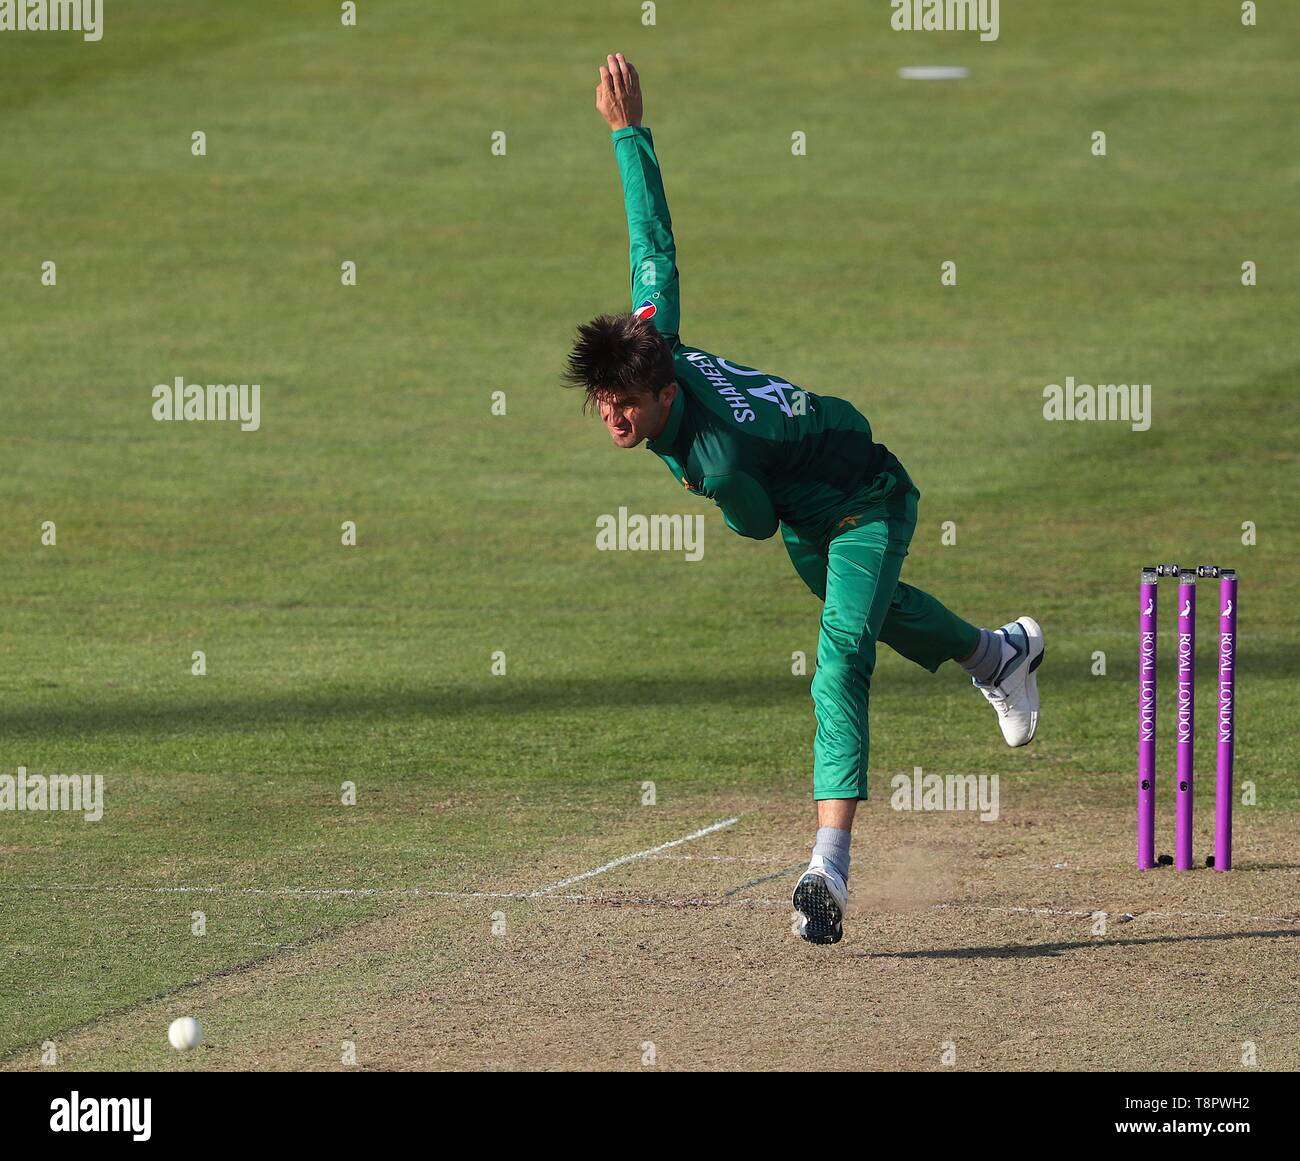 Bristol, UK. 14th May 2019. Shaheen Afridi of Pakistan bowls the ball during the England v Pakistan, Royal London One Day International match at Bristol County Ground. Credit: Mitchell GunnESPA-Images Credit: Cal Sport Media/Alamy Live News Stock Photo